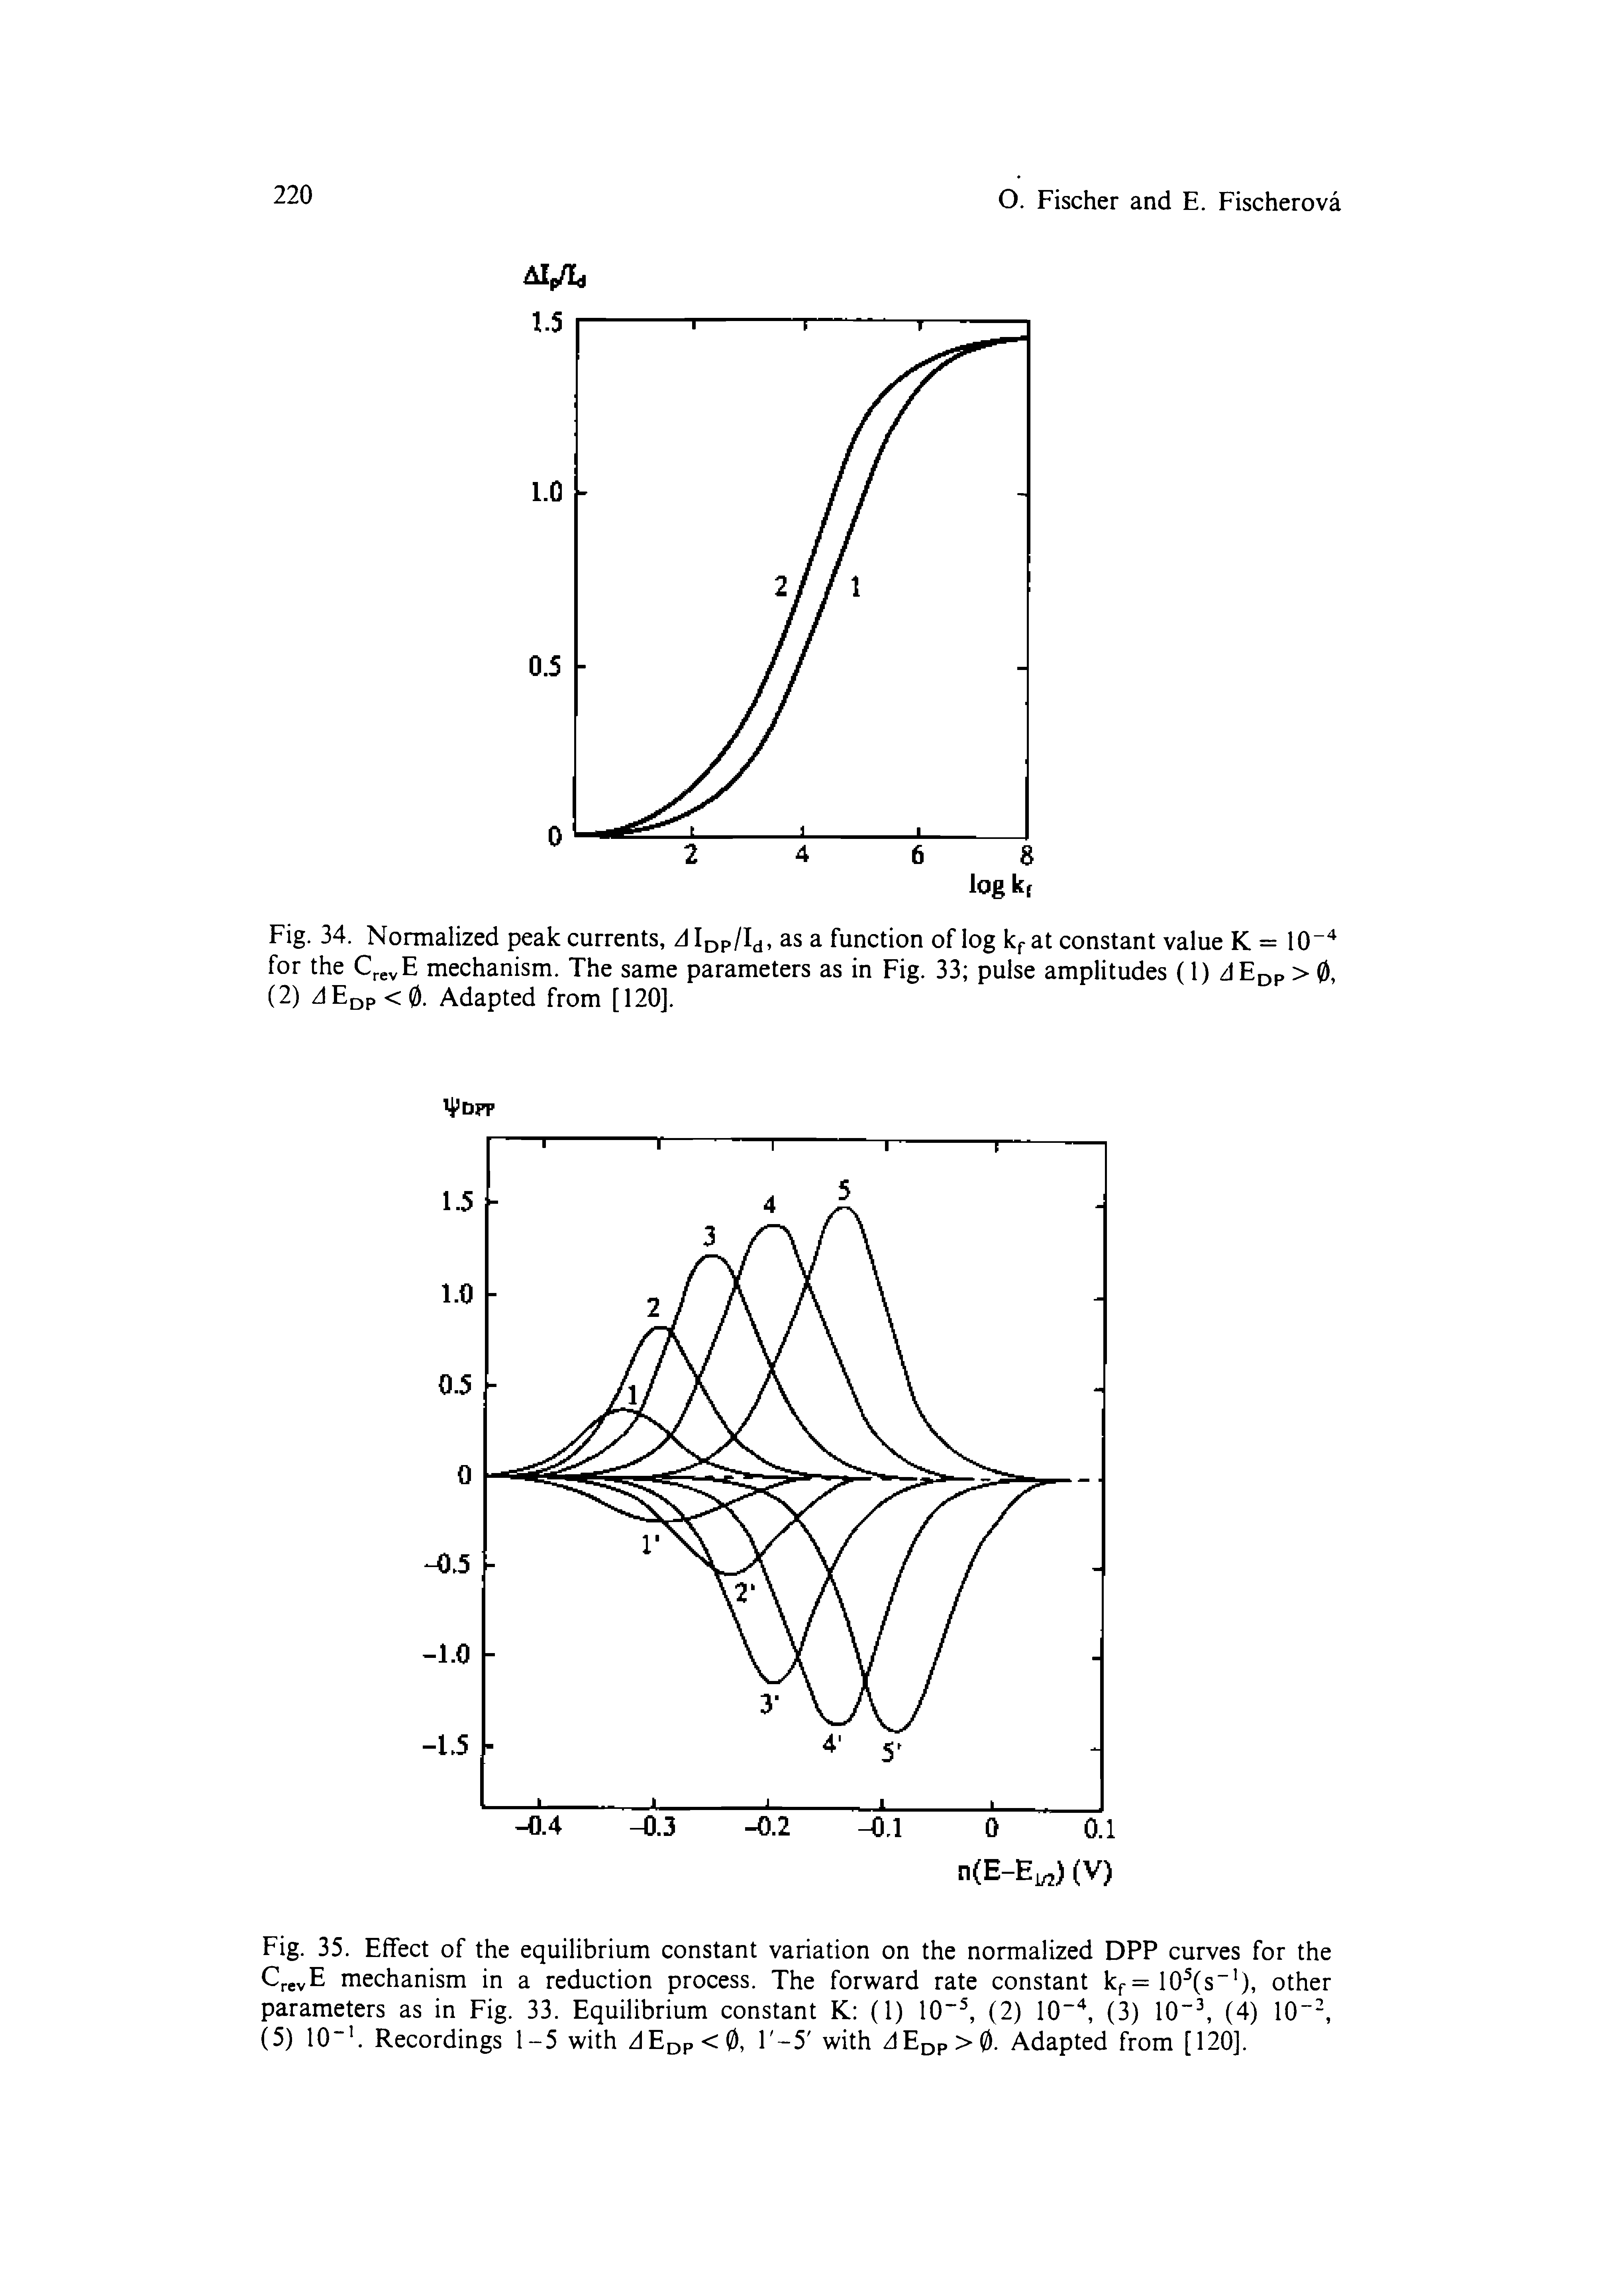 Fig. 35. Effect of the equilibrium constant variation on the normalized DPP curves for the CrevE mechanism in a reduction process. The forward rate constant kf=10 (s ), other parameters as in Fig. 33. Equilibrium constant K (1) 10, (2) 10 (3) 10 , (4) 10 , (5) 10" . Recordings 1-5 with dEop<0, T-5 with dEop>0. Adapted from [120].